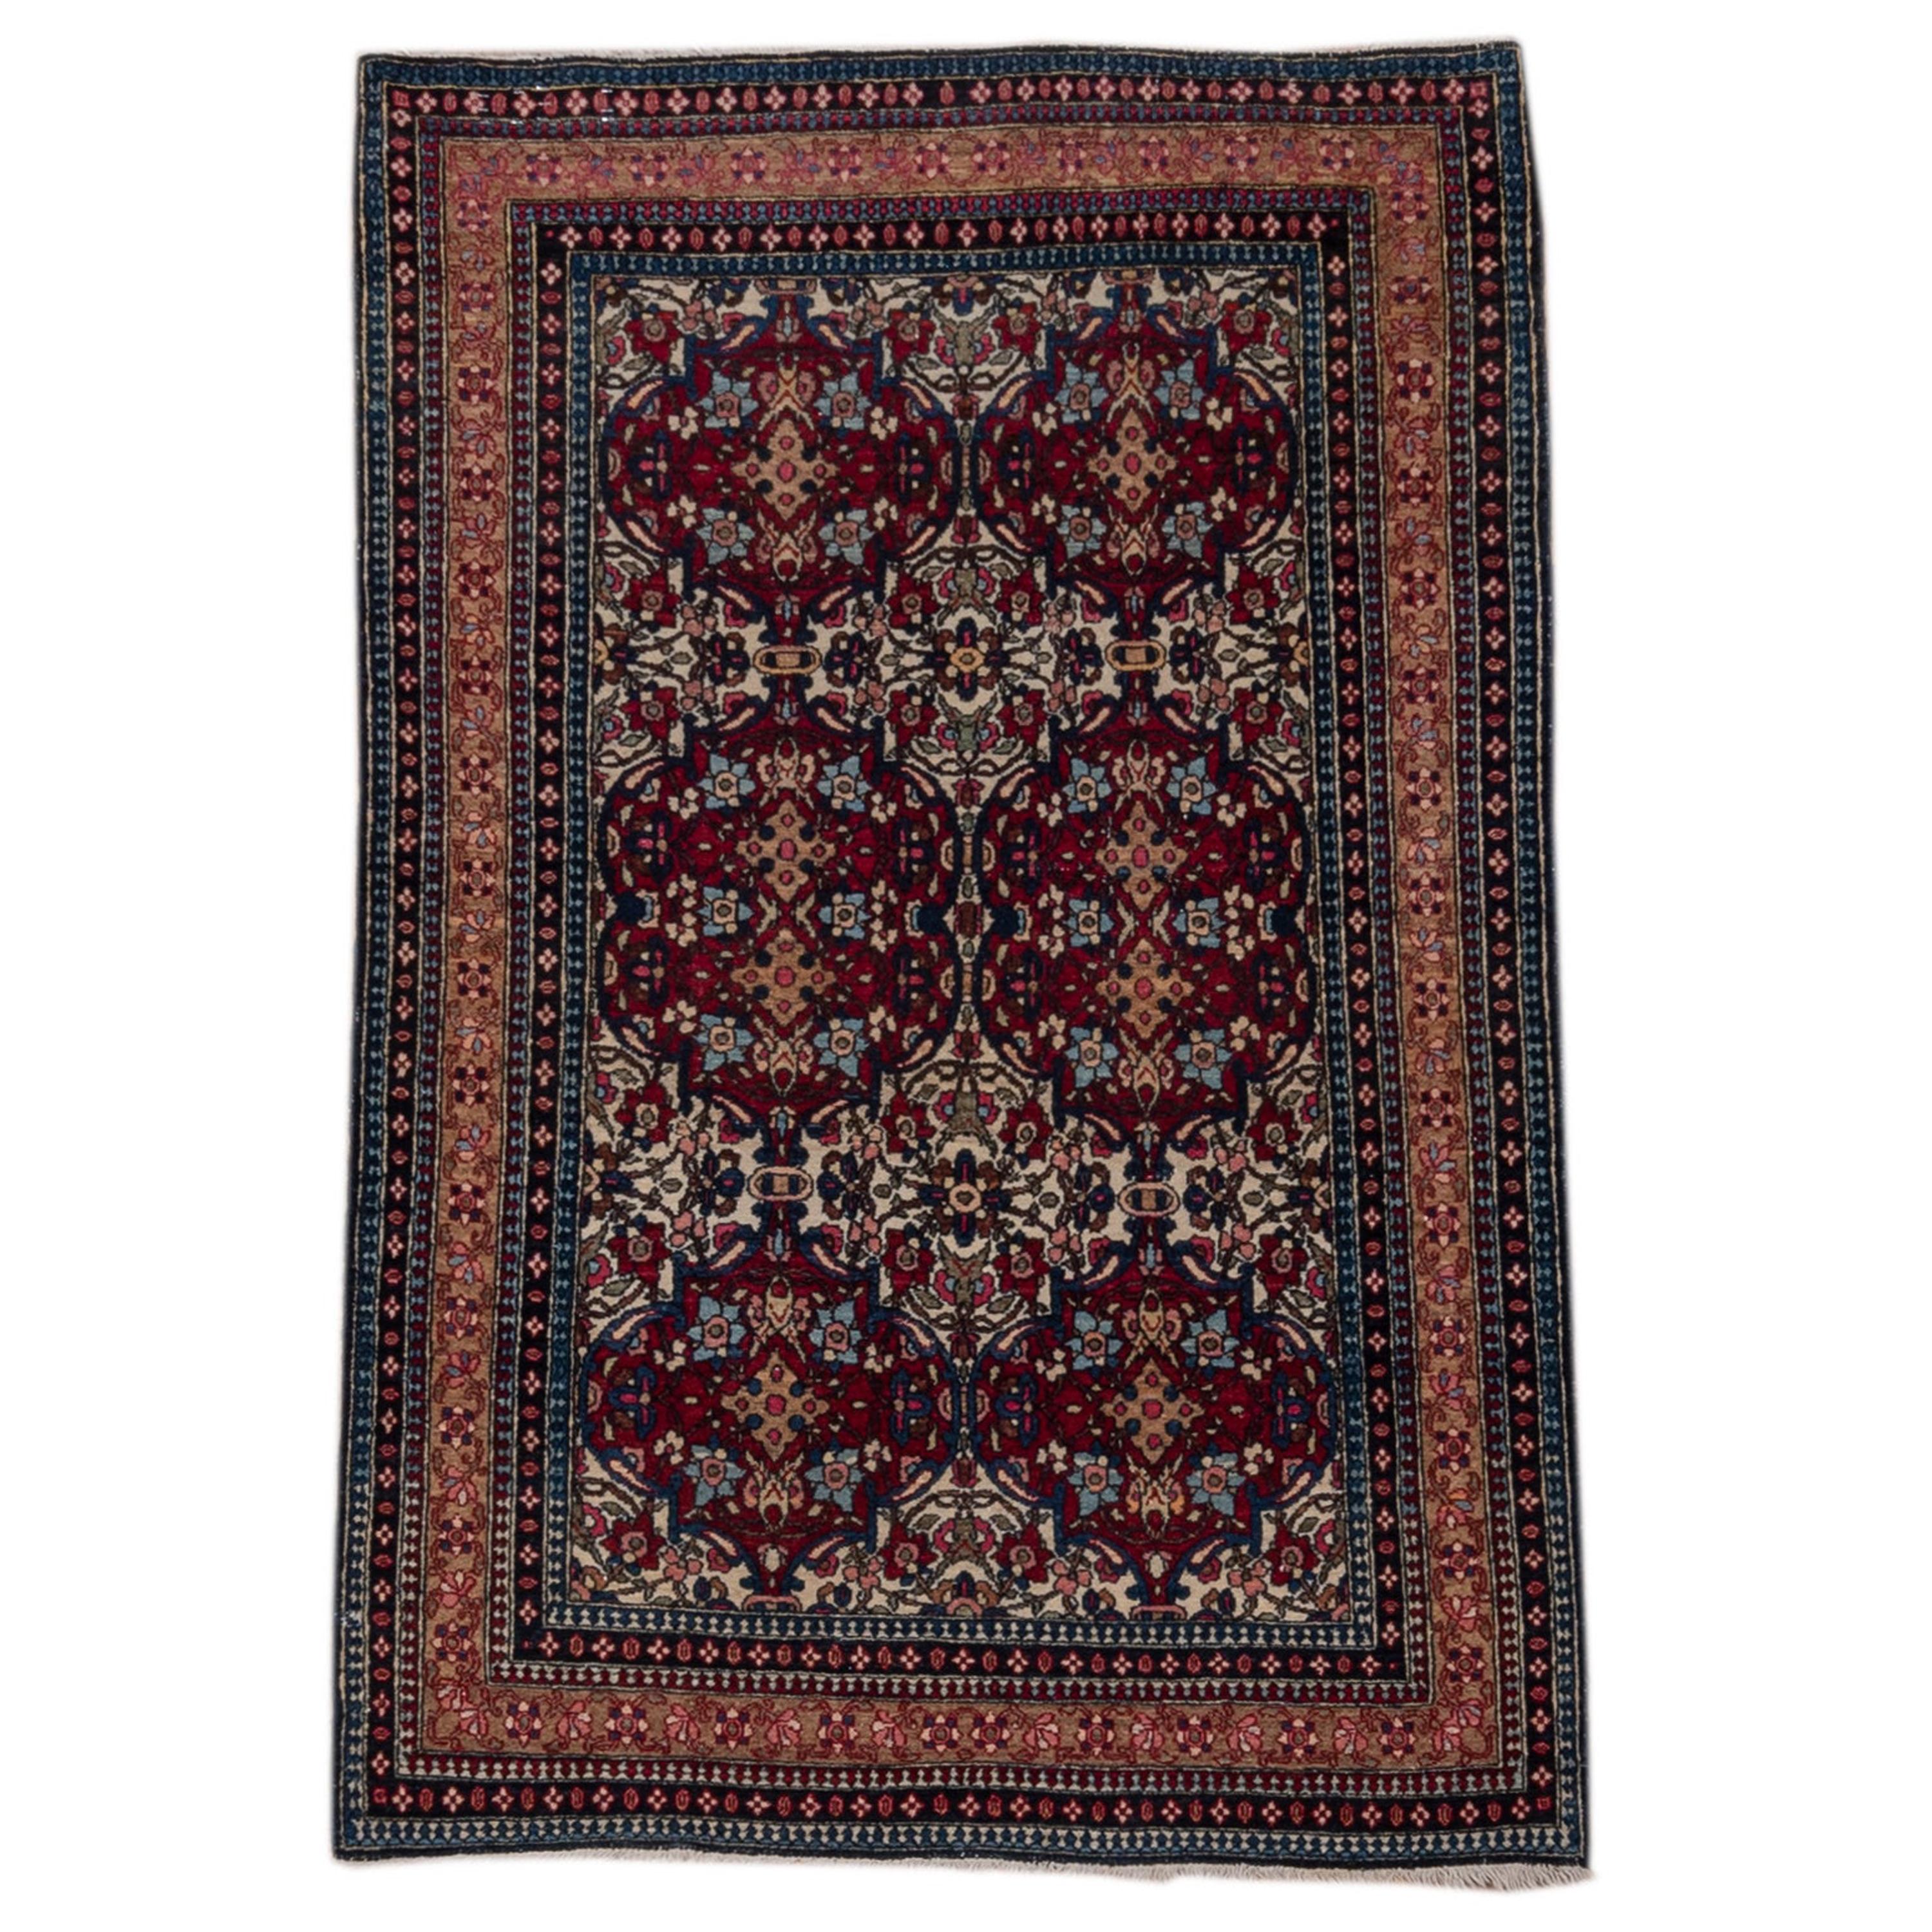 Antique Persian Isfahan Rug, Dark Red and Ivory Field, circa 1920s